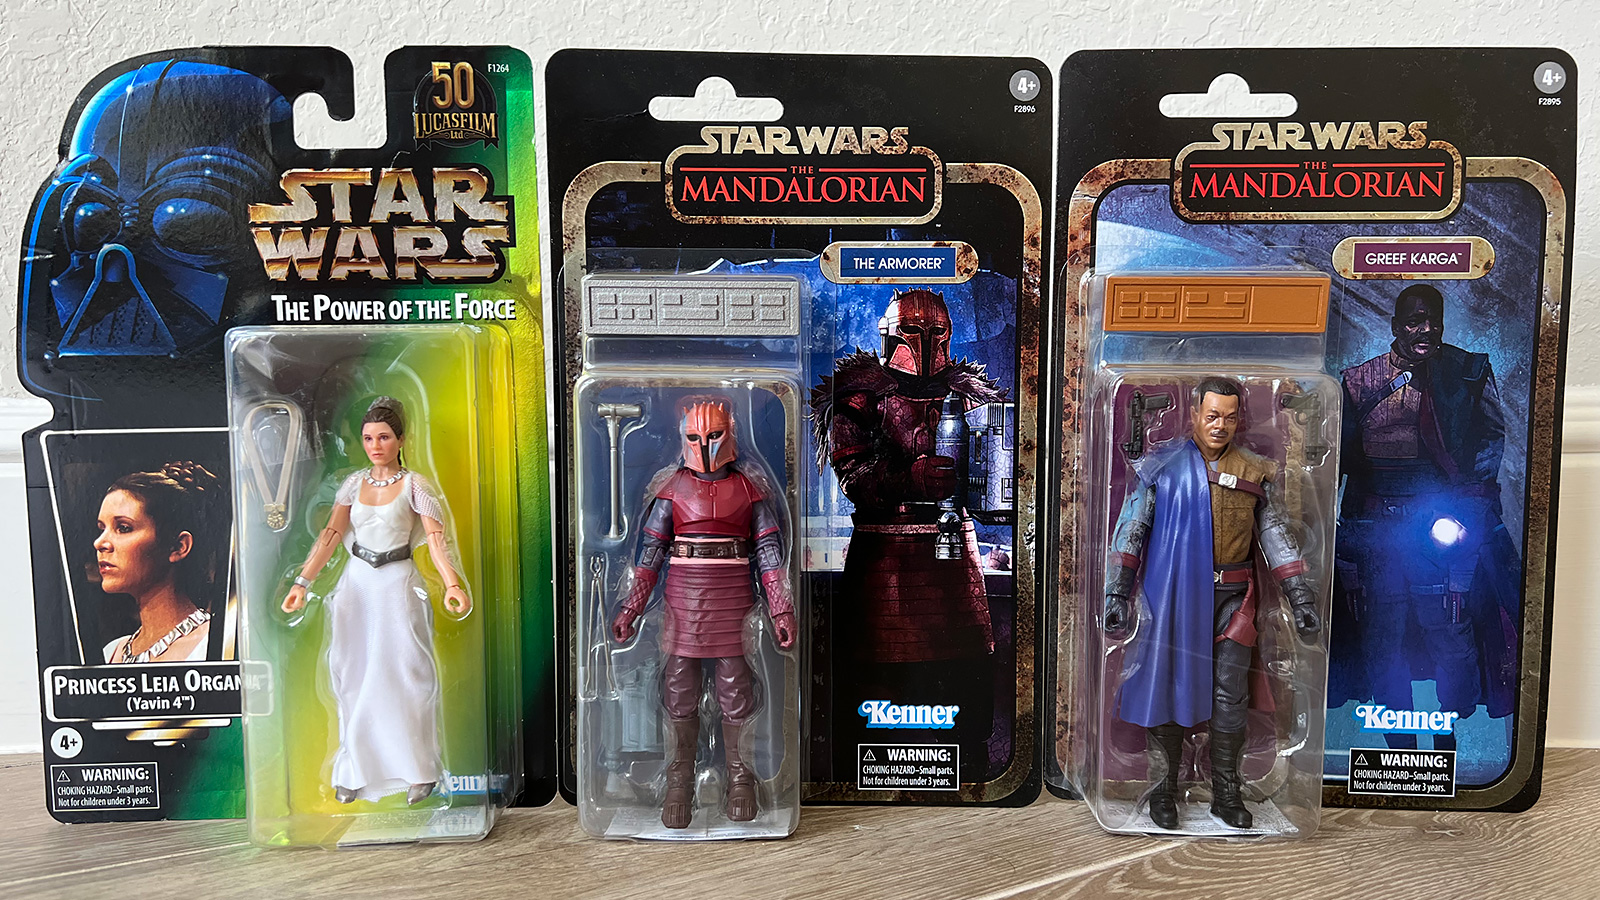 Mail Call 12/22 - Excluisve TBS 6-Inch Carded Princess Leia Organa (Yavin 4), Credit Collection The Armorer And Greef Karga Figures